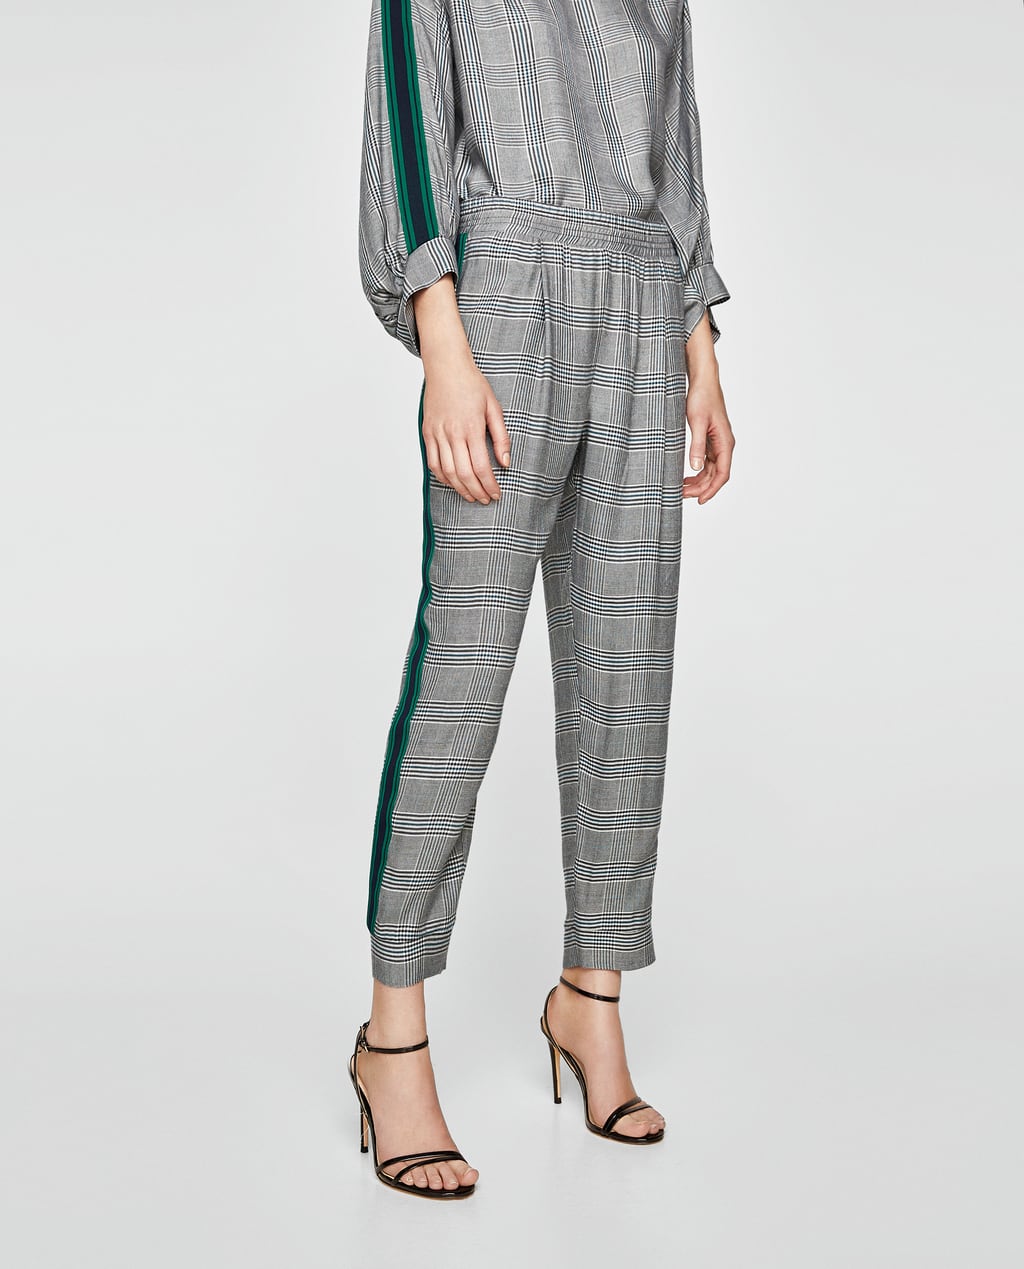  Zara Jogging Trousers with Striped Sides 